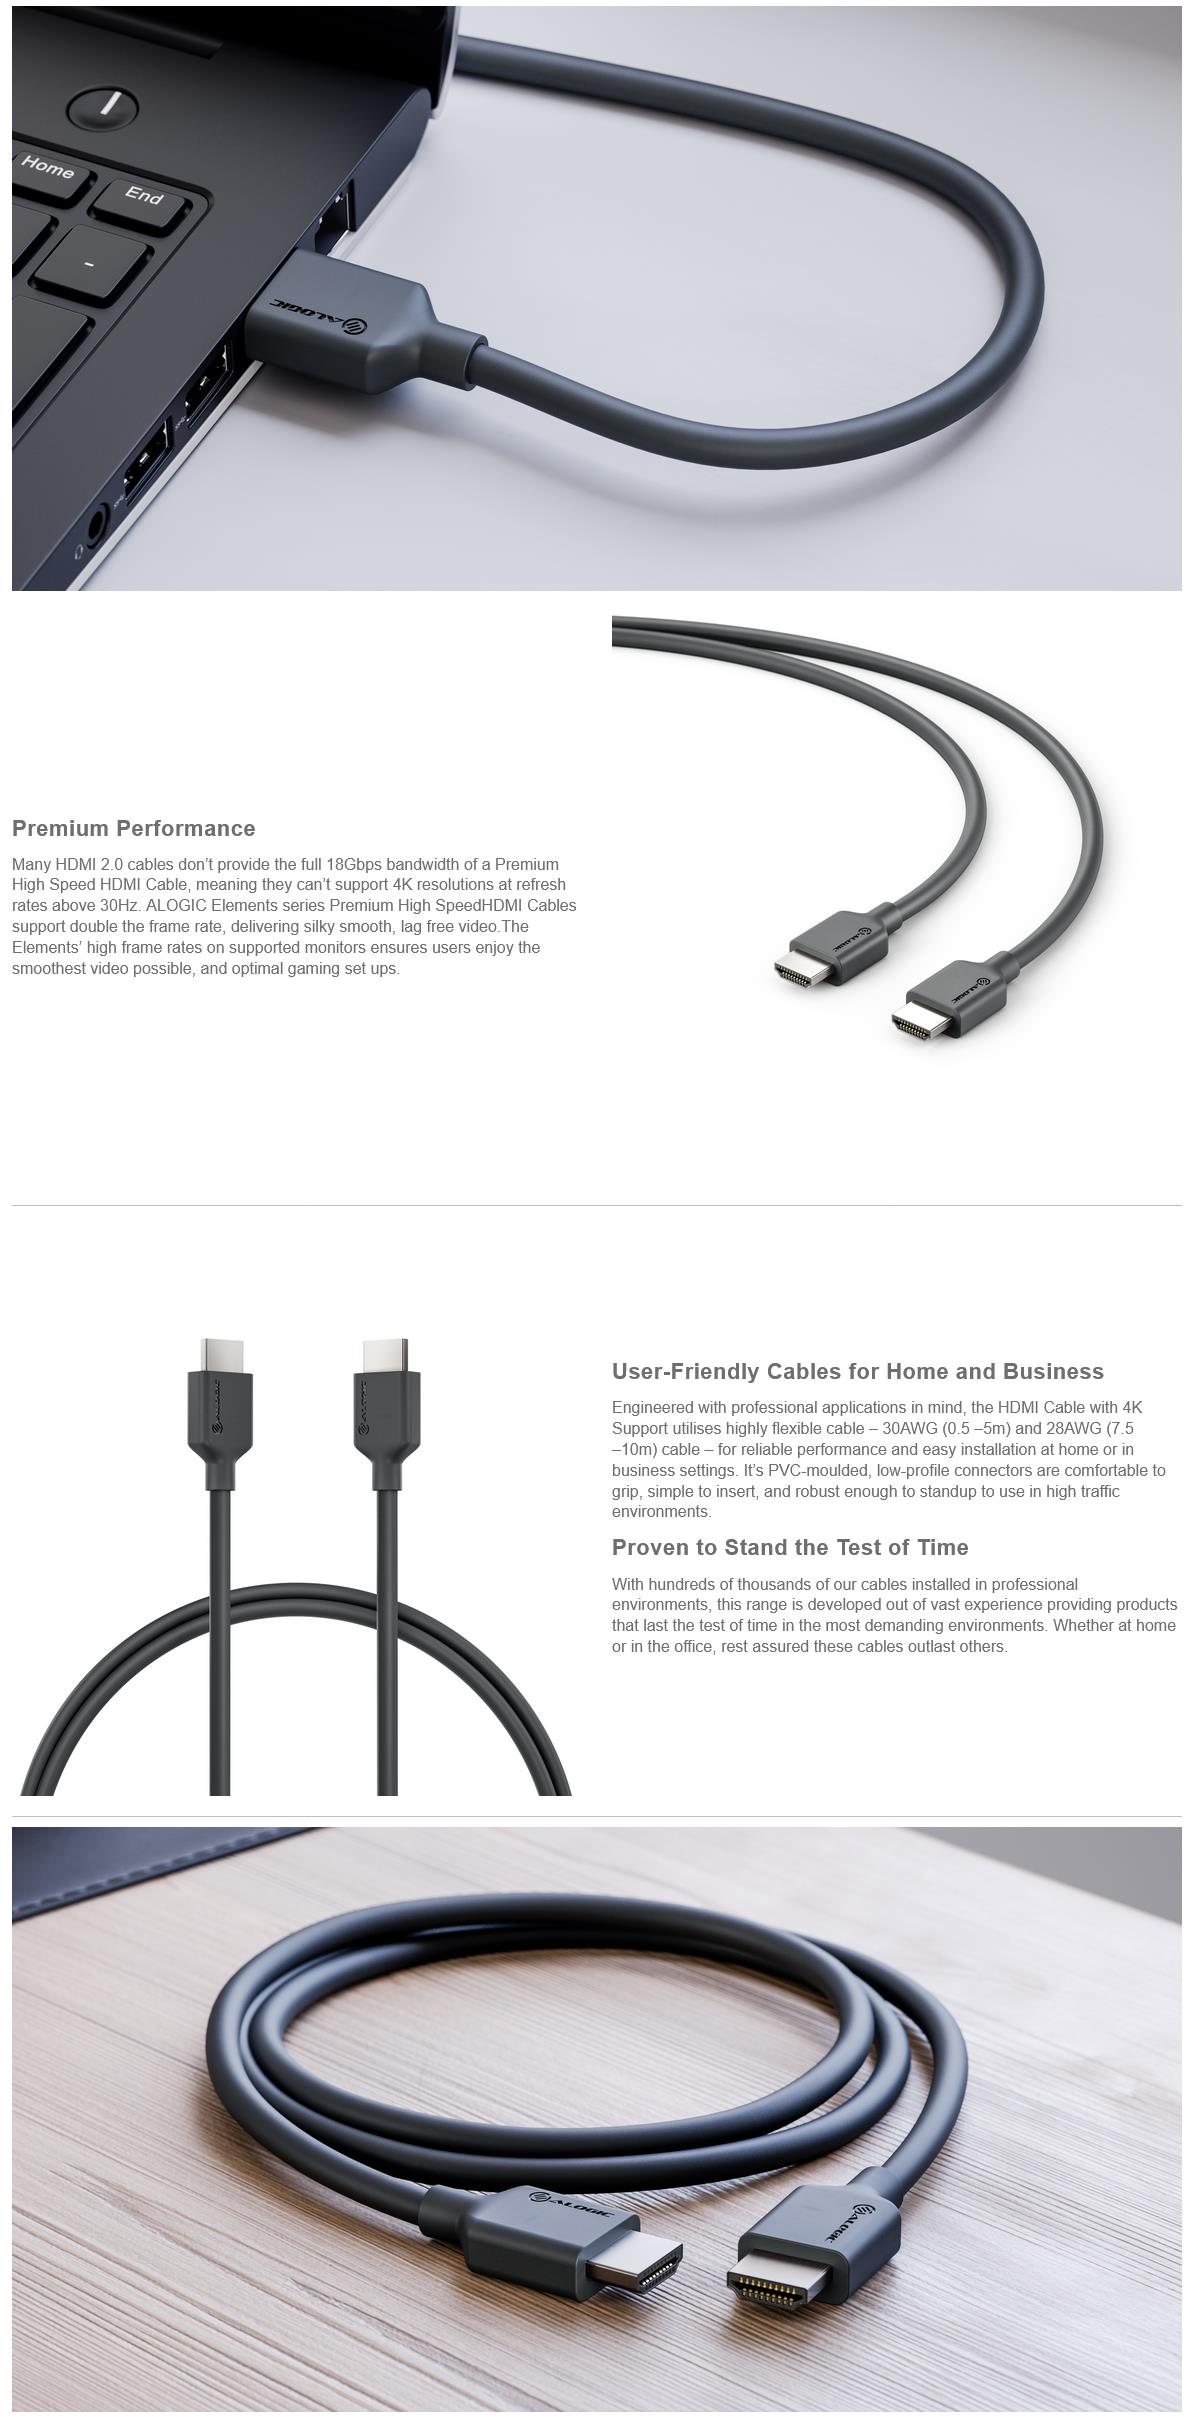 A large marketing image providing additional information about the product ALOGIC Elements High Speed 3m HDMI Cable with 4K and Ethernet - Additional alt info not provided